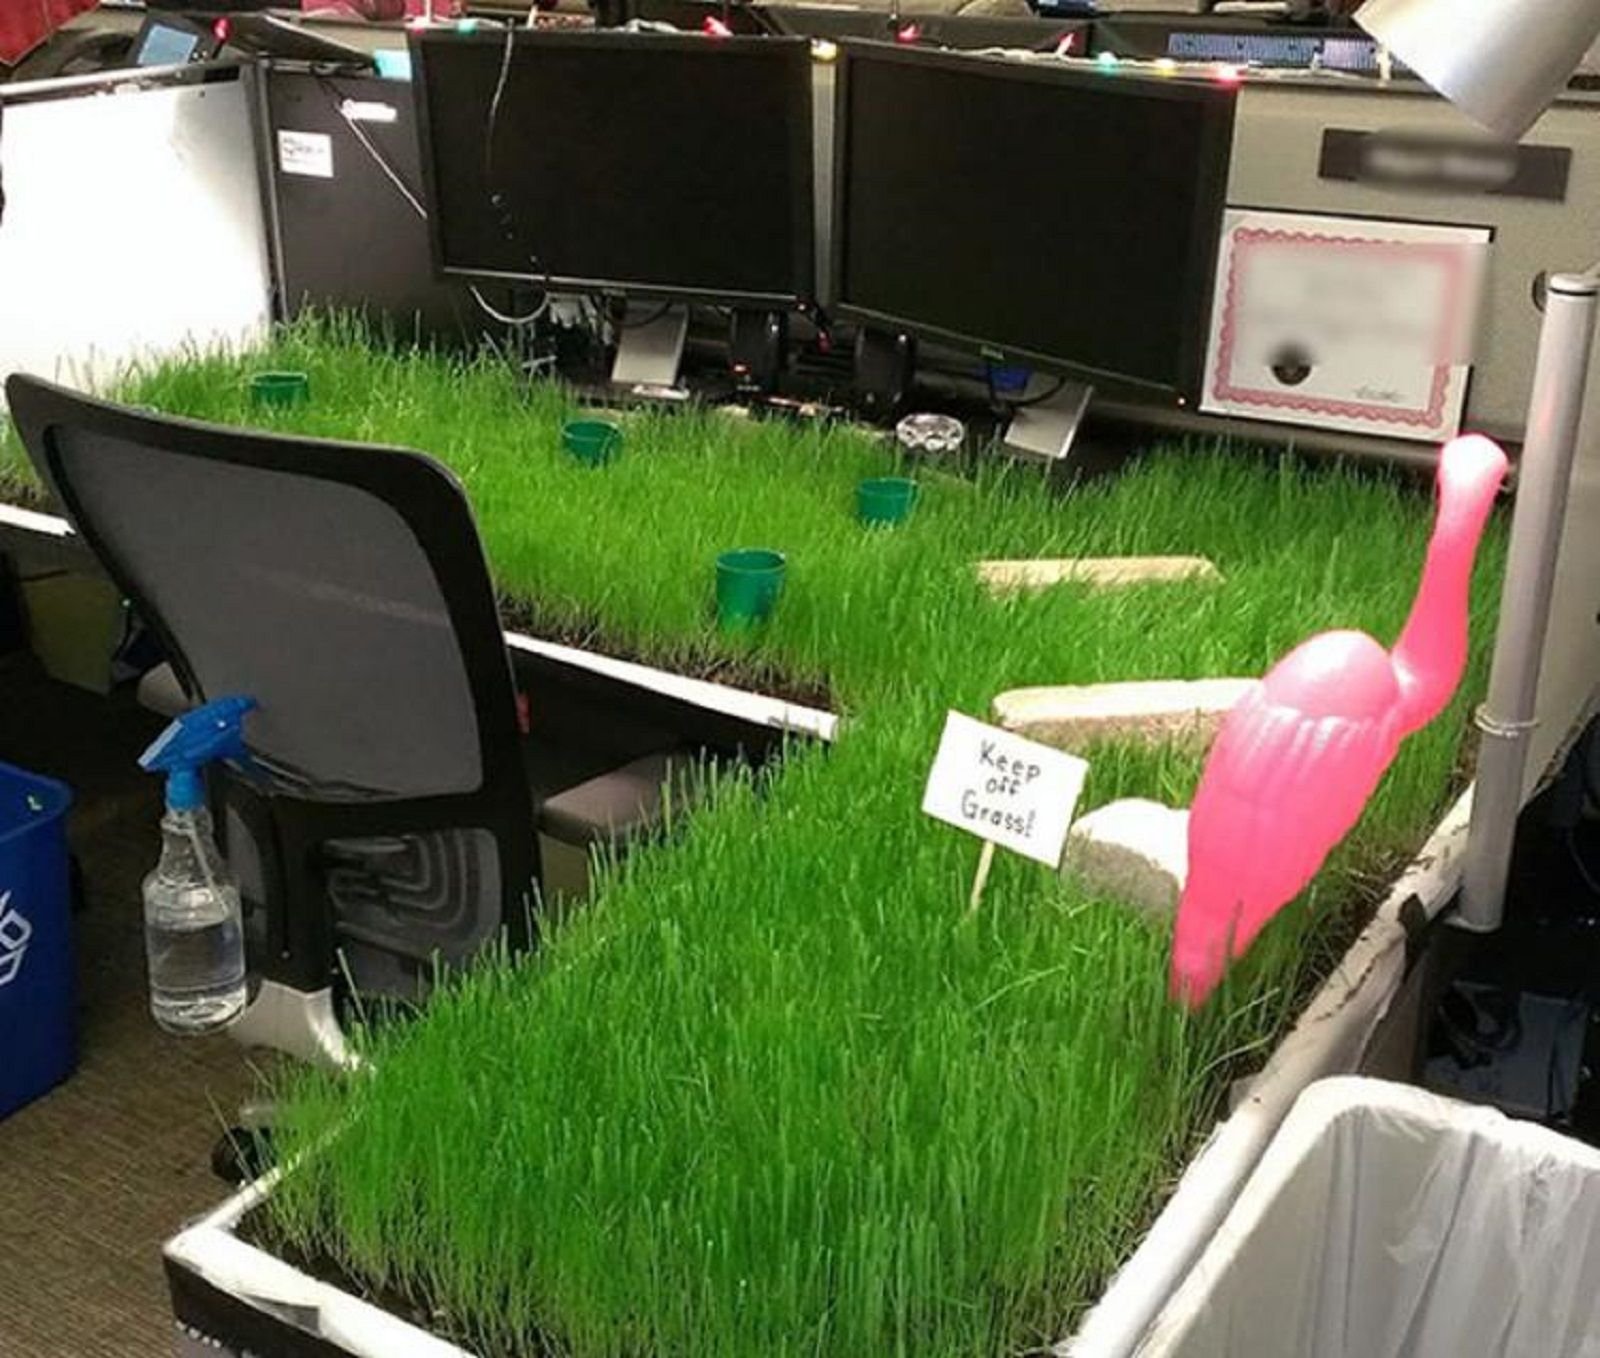 21 of the best office tech pranks of all time image 16